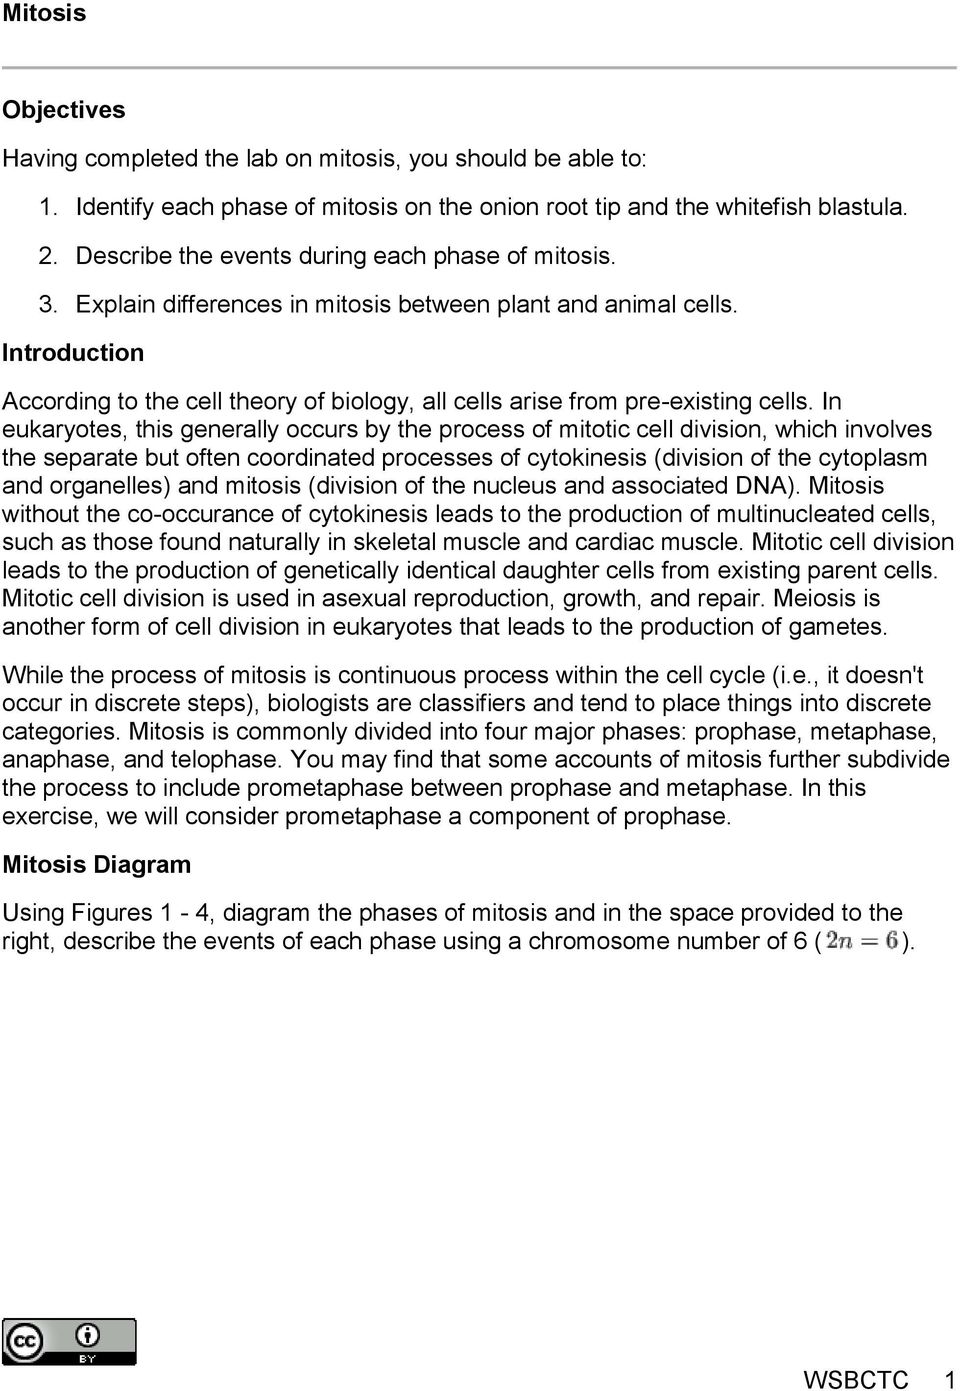 Introduction According to the cell theory of biology, all cells arise from pre-existing cells.